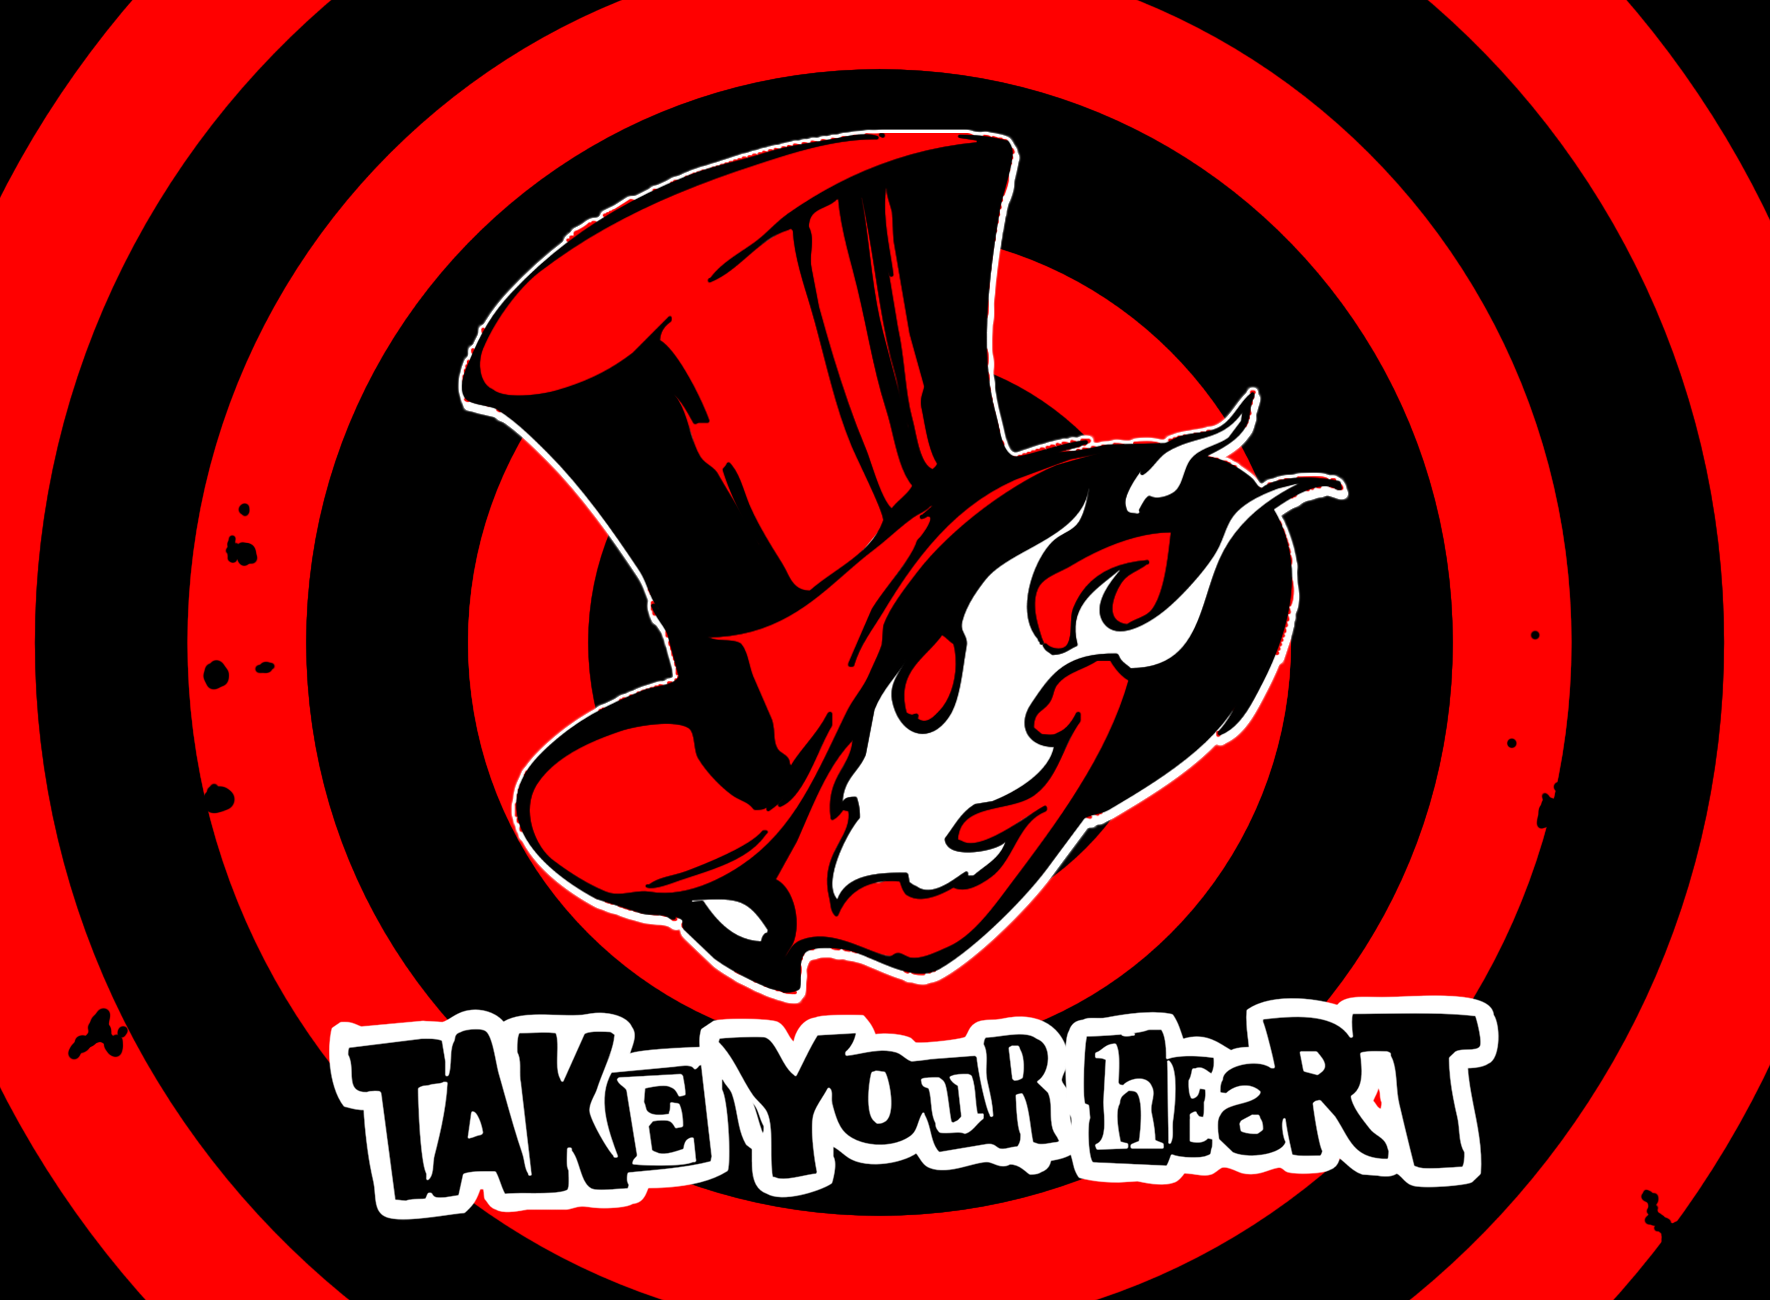 Calling card template? : r/Persona5